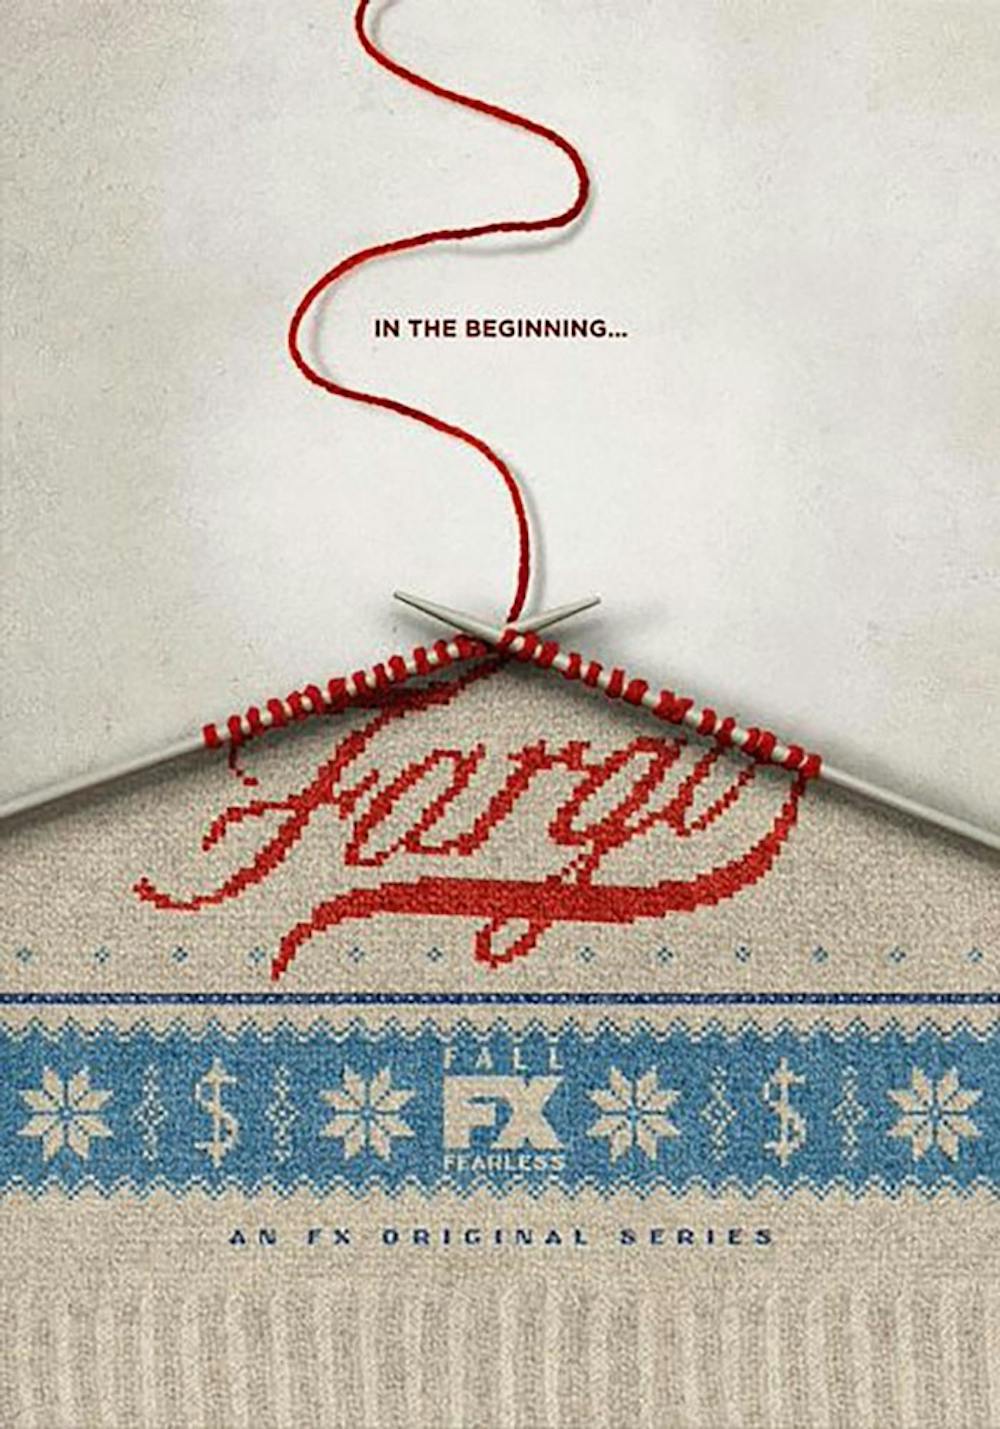 <p>The most recent episode of “Fargo” heats up series tension as the escalating violence between families takes a turn for the worse. As each family begins to learn of its rival family’s misdeeds, the backwater violence in the small rural town will only bring more deaths.</p>